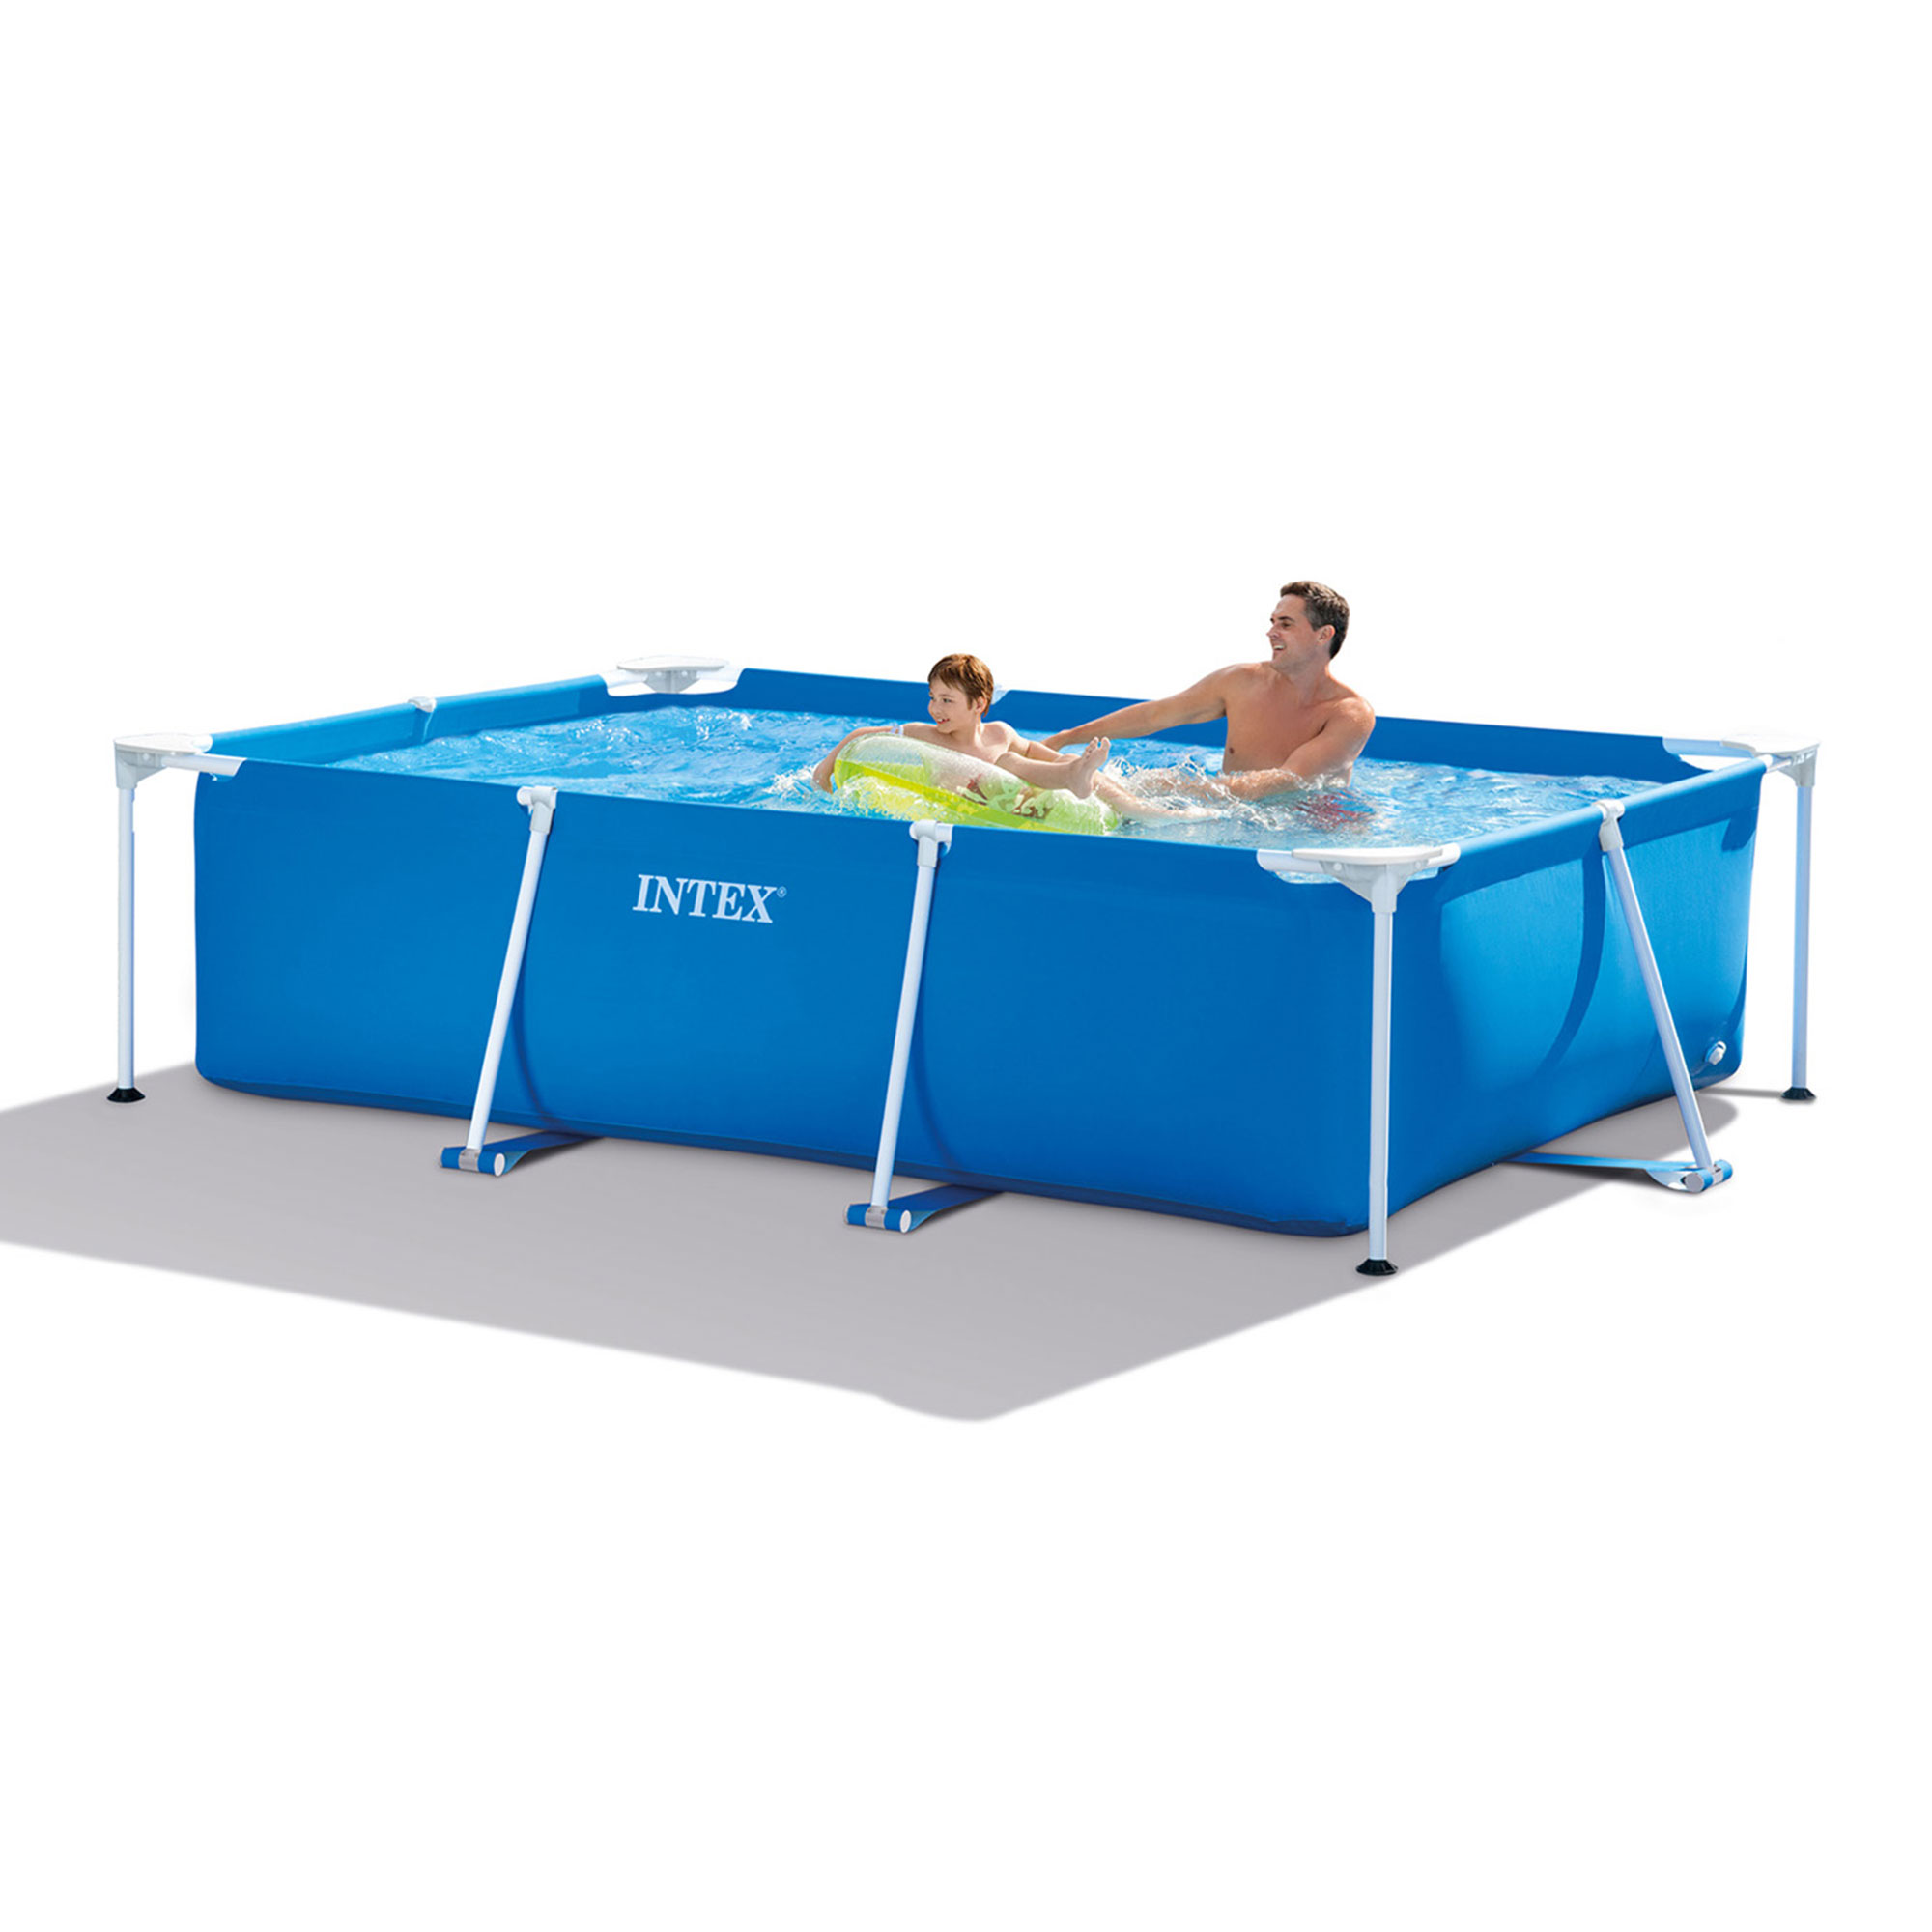 Intex 8.5ft x 26in Rectangular Frame Above Ground Swimming Pool, Blue - image 2 of 11